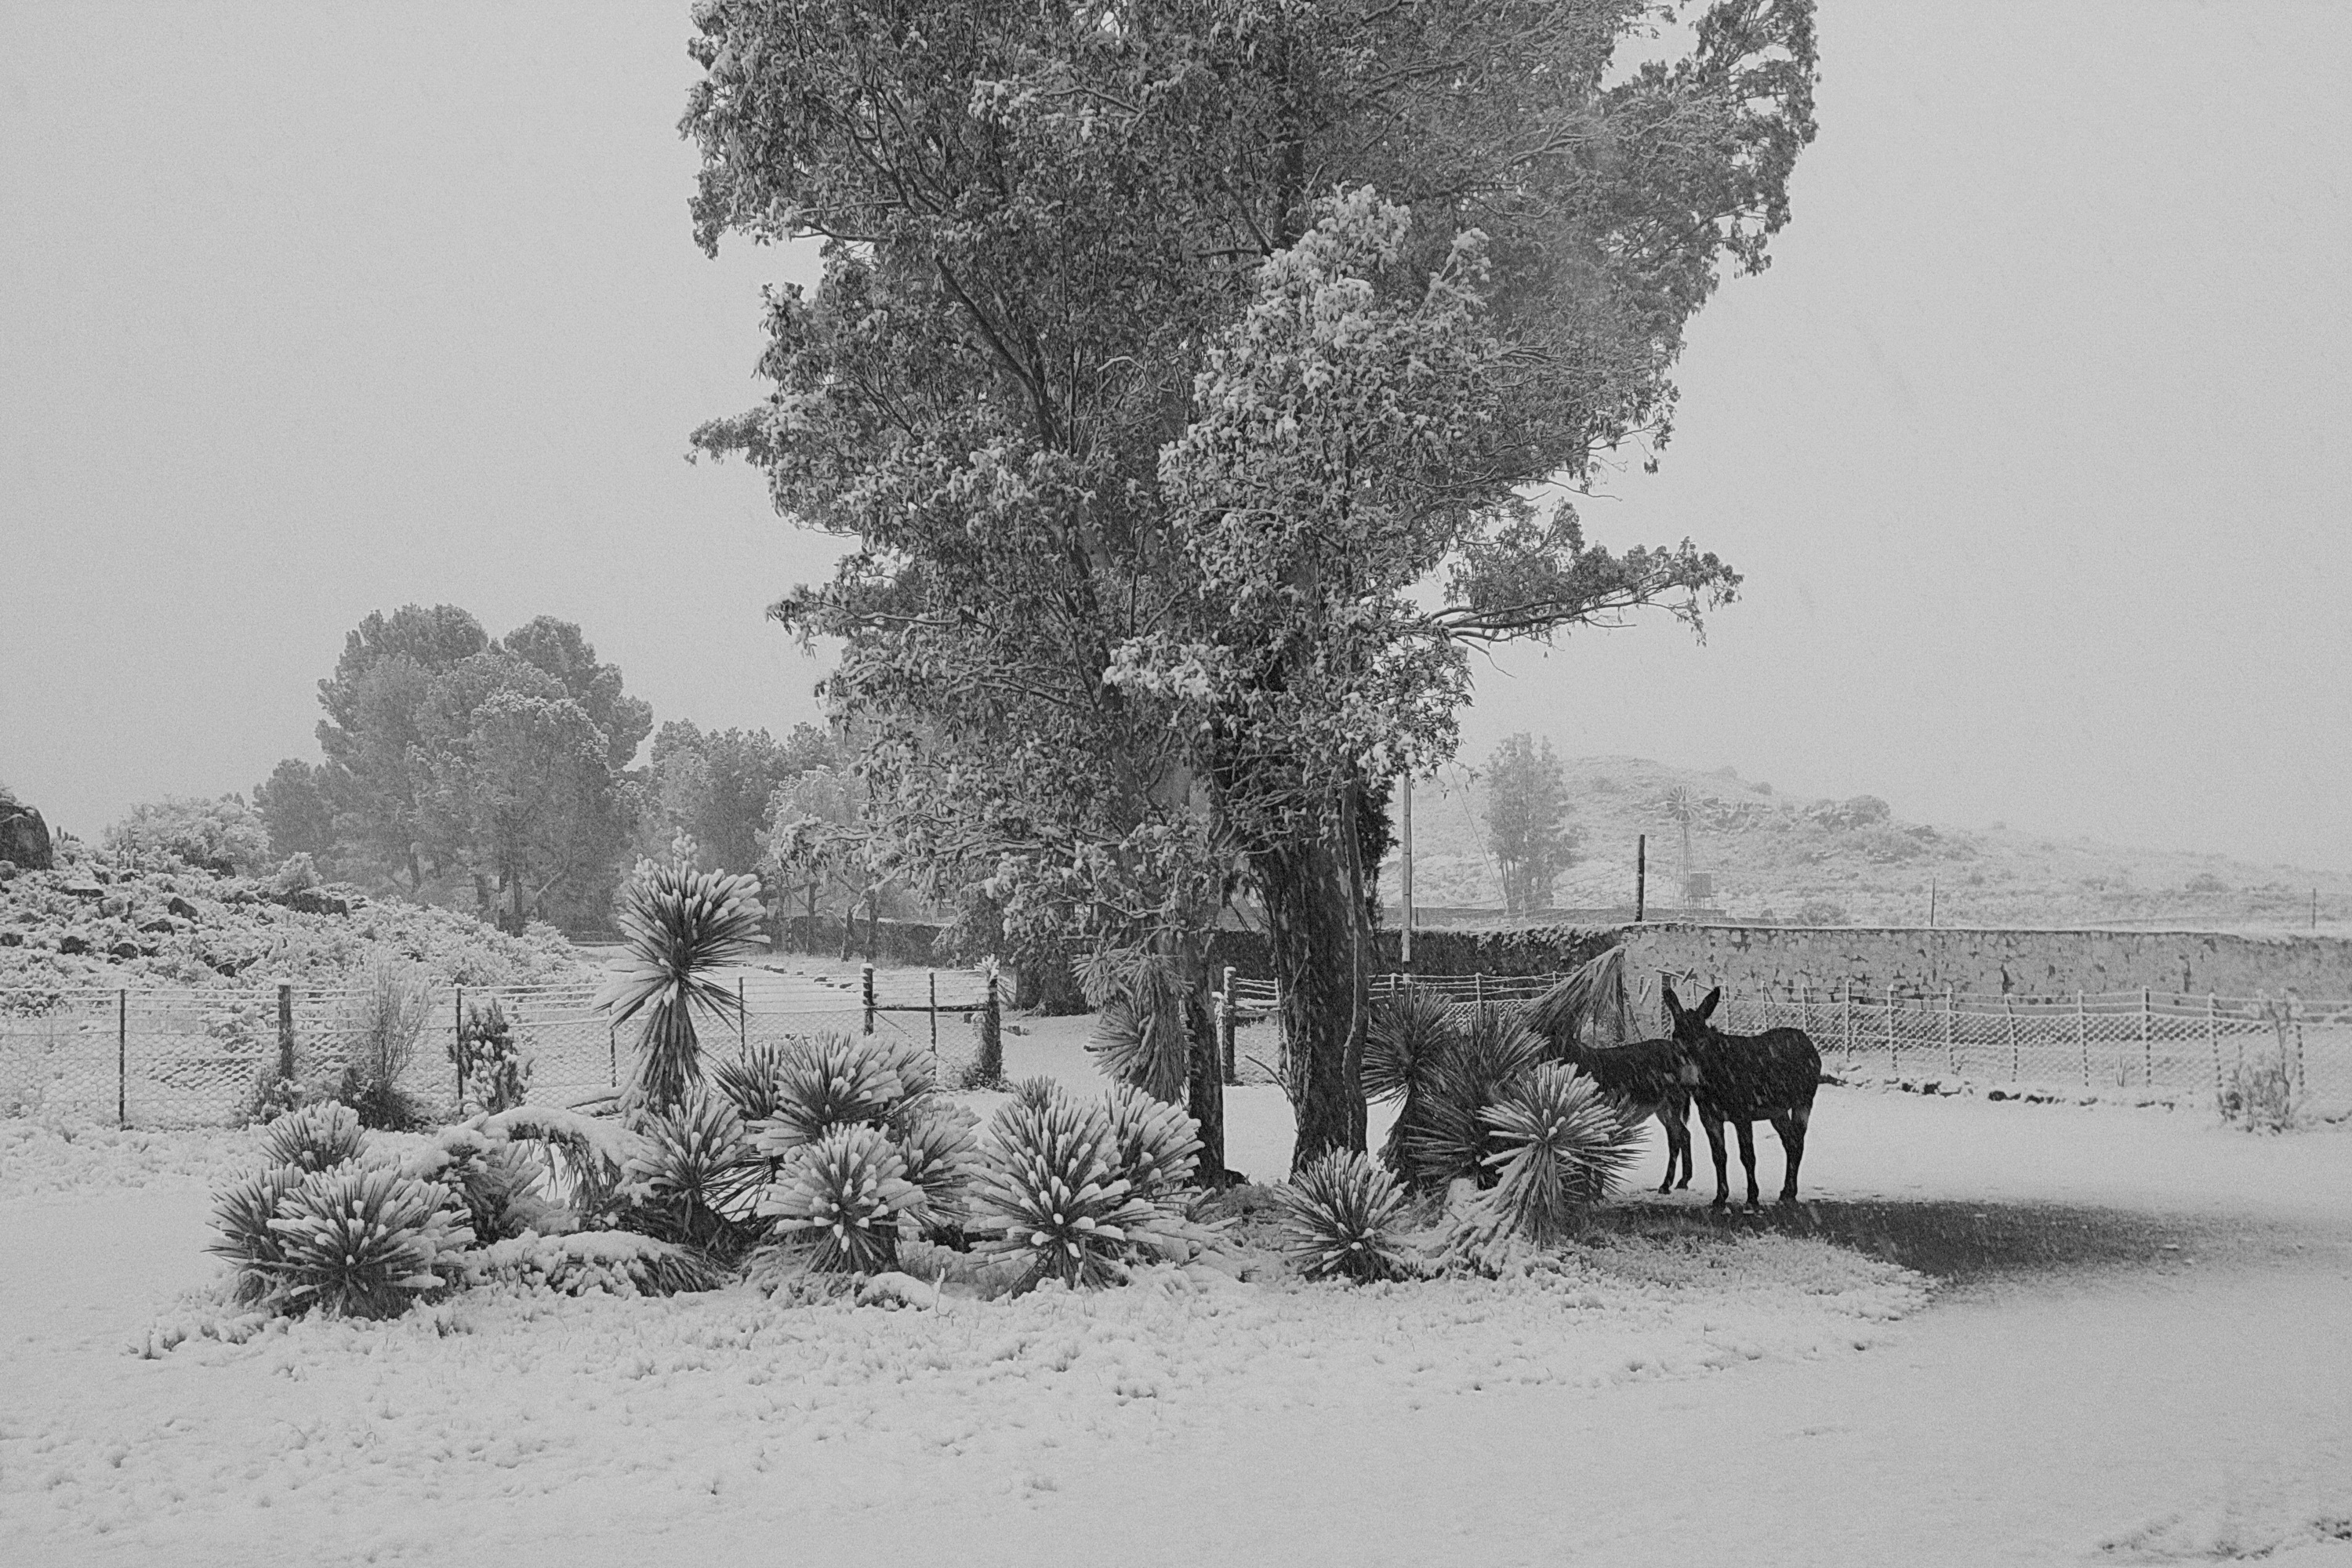 Shy and freezing trio of donkeys look up from their snowy breakfasts. Image: Chris Marais